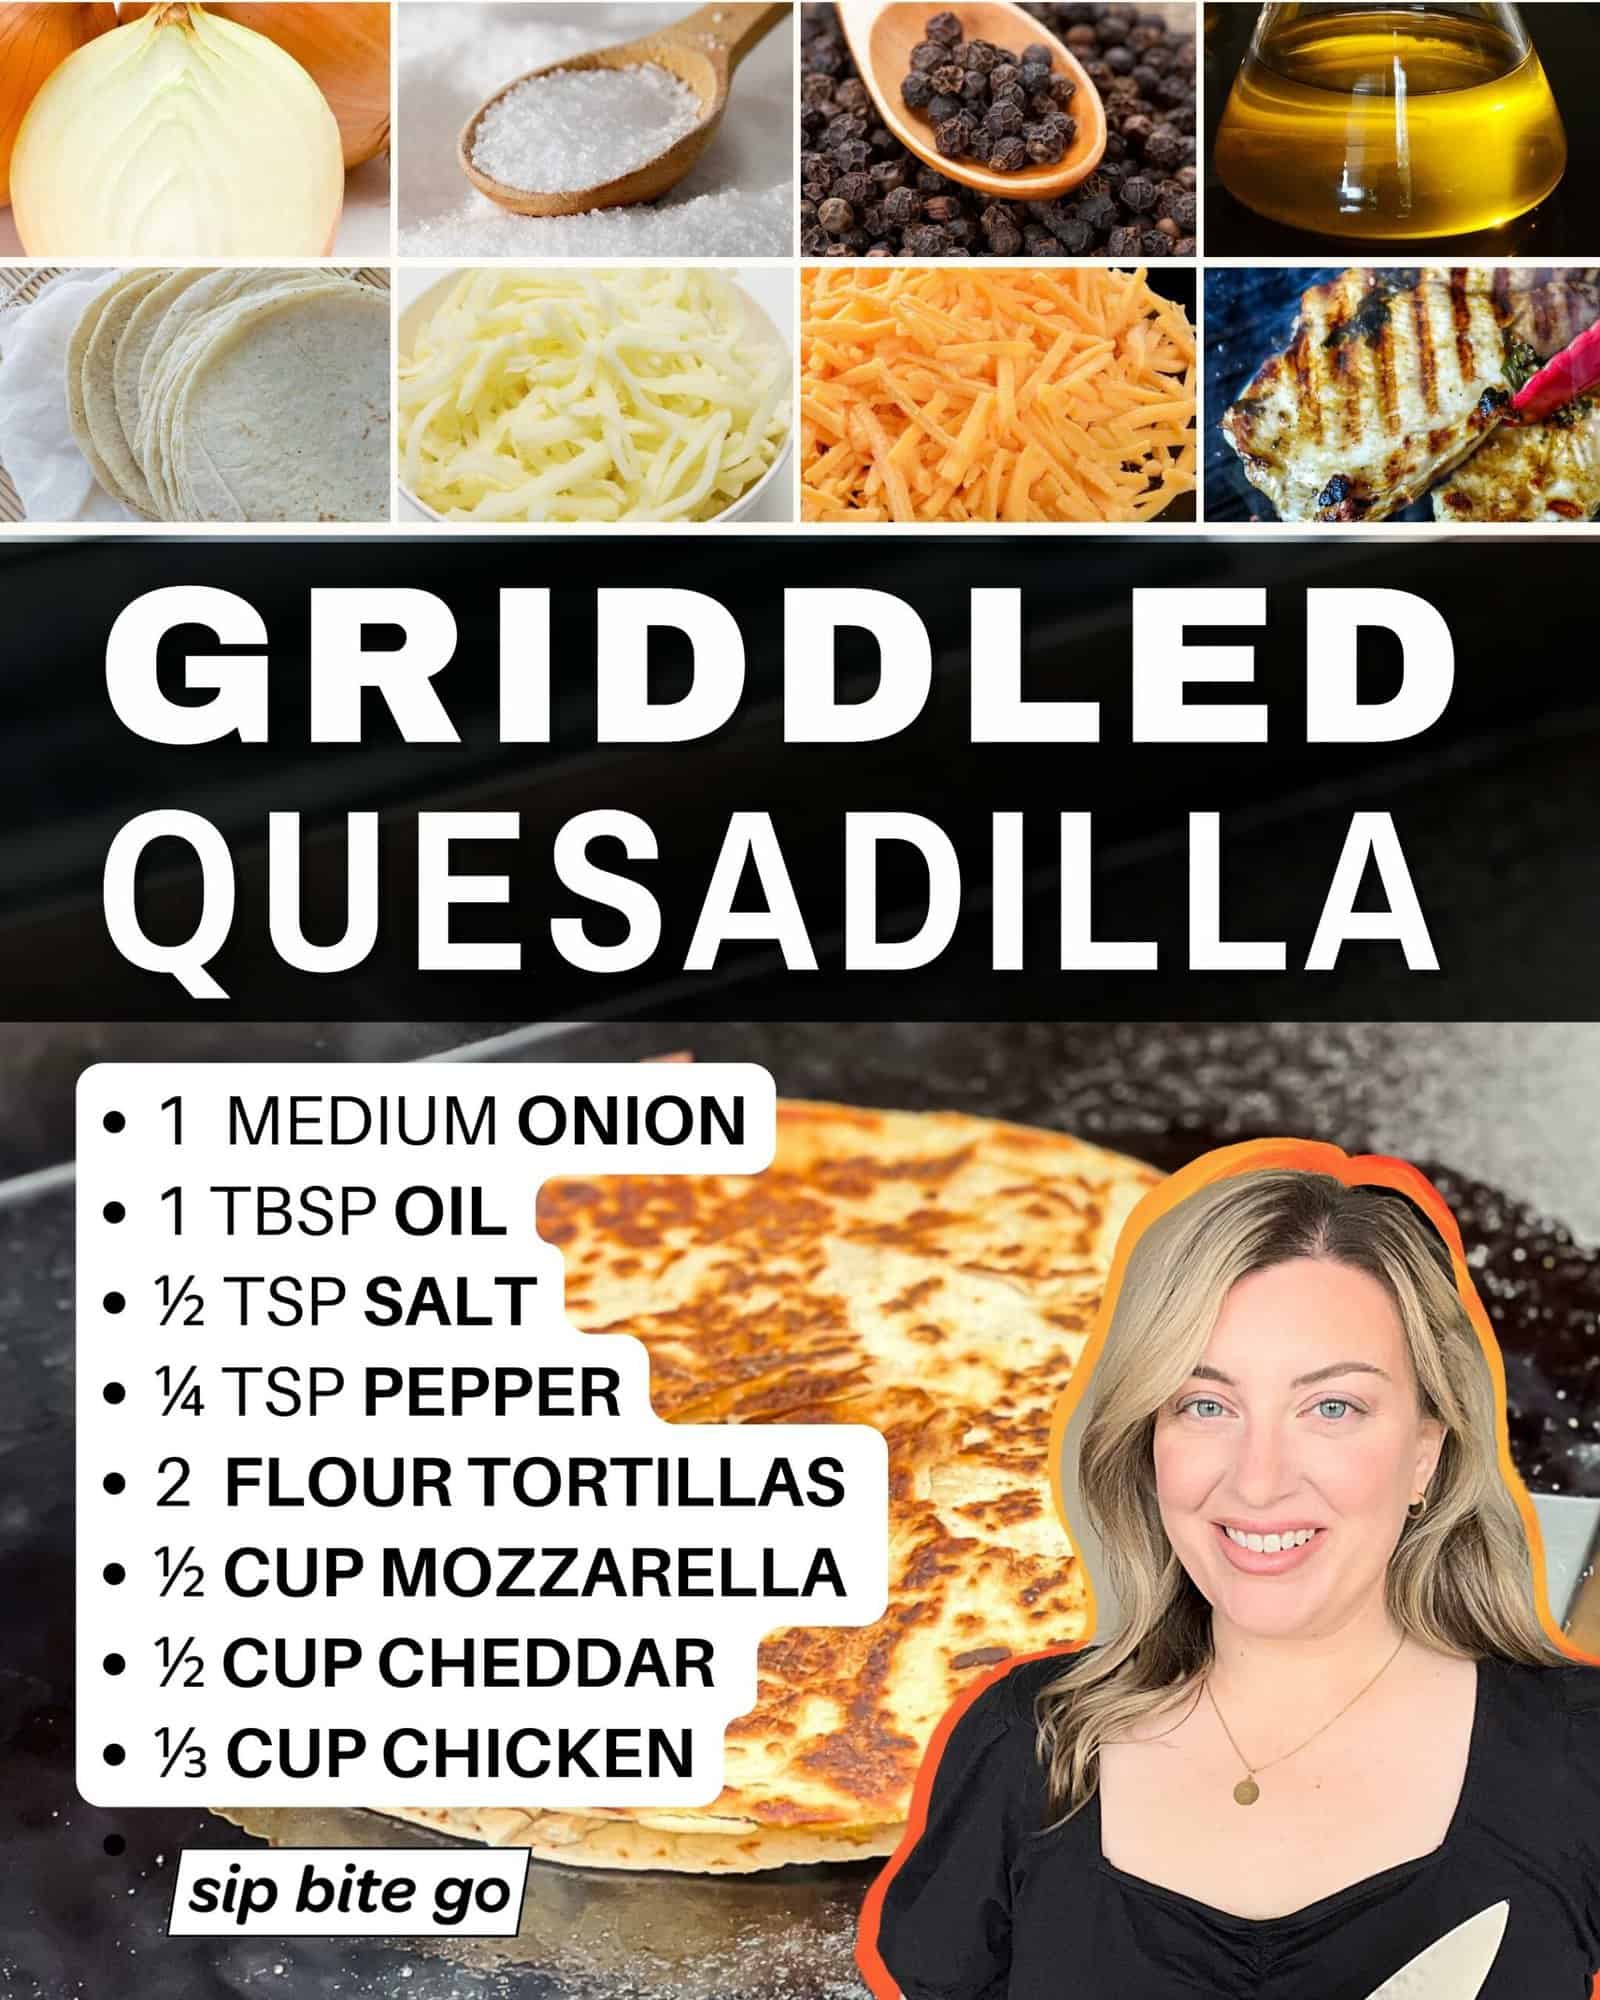 Infographic with recipe ingredients for griddled quesadillas on the flattop grill with Jenna Passaro and Sip Bite Go logo